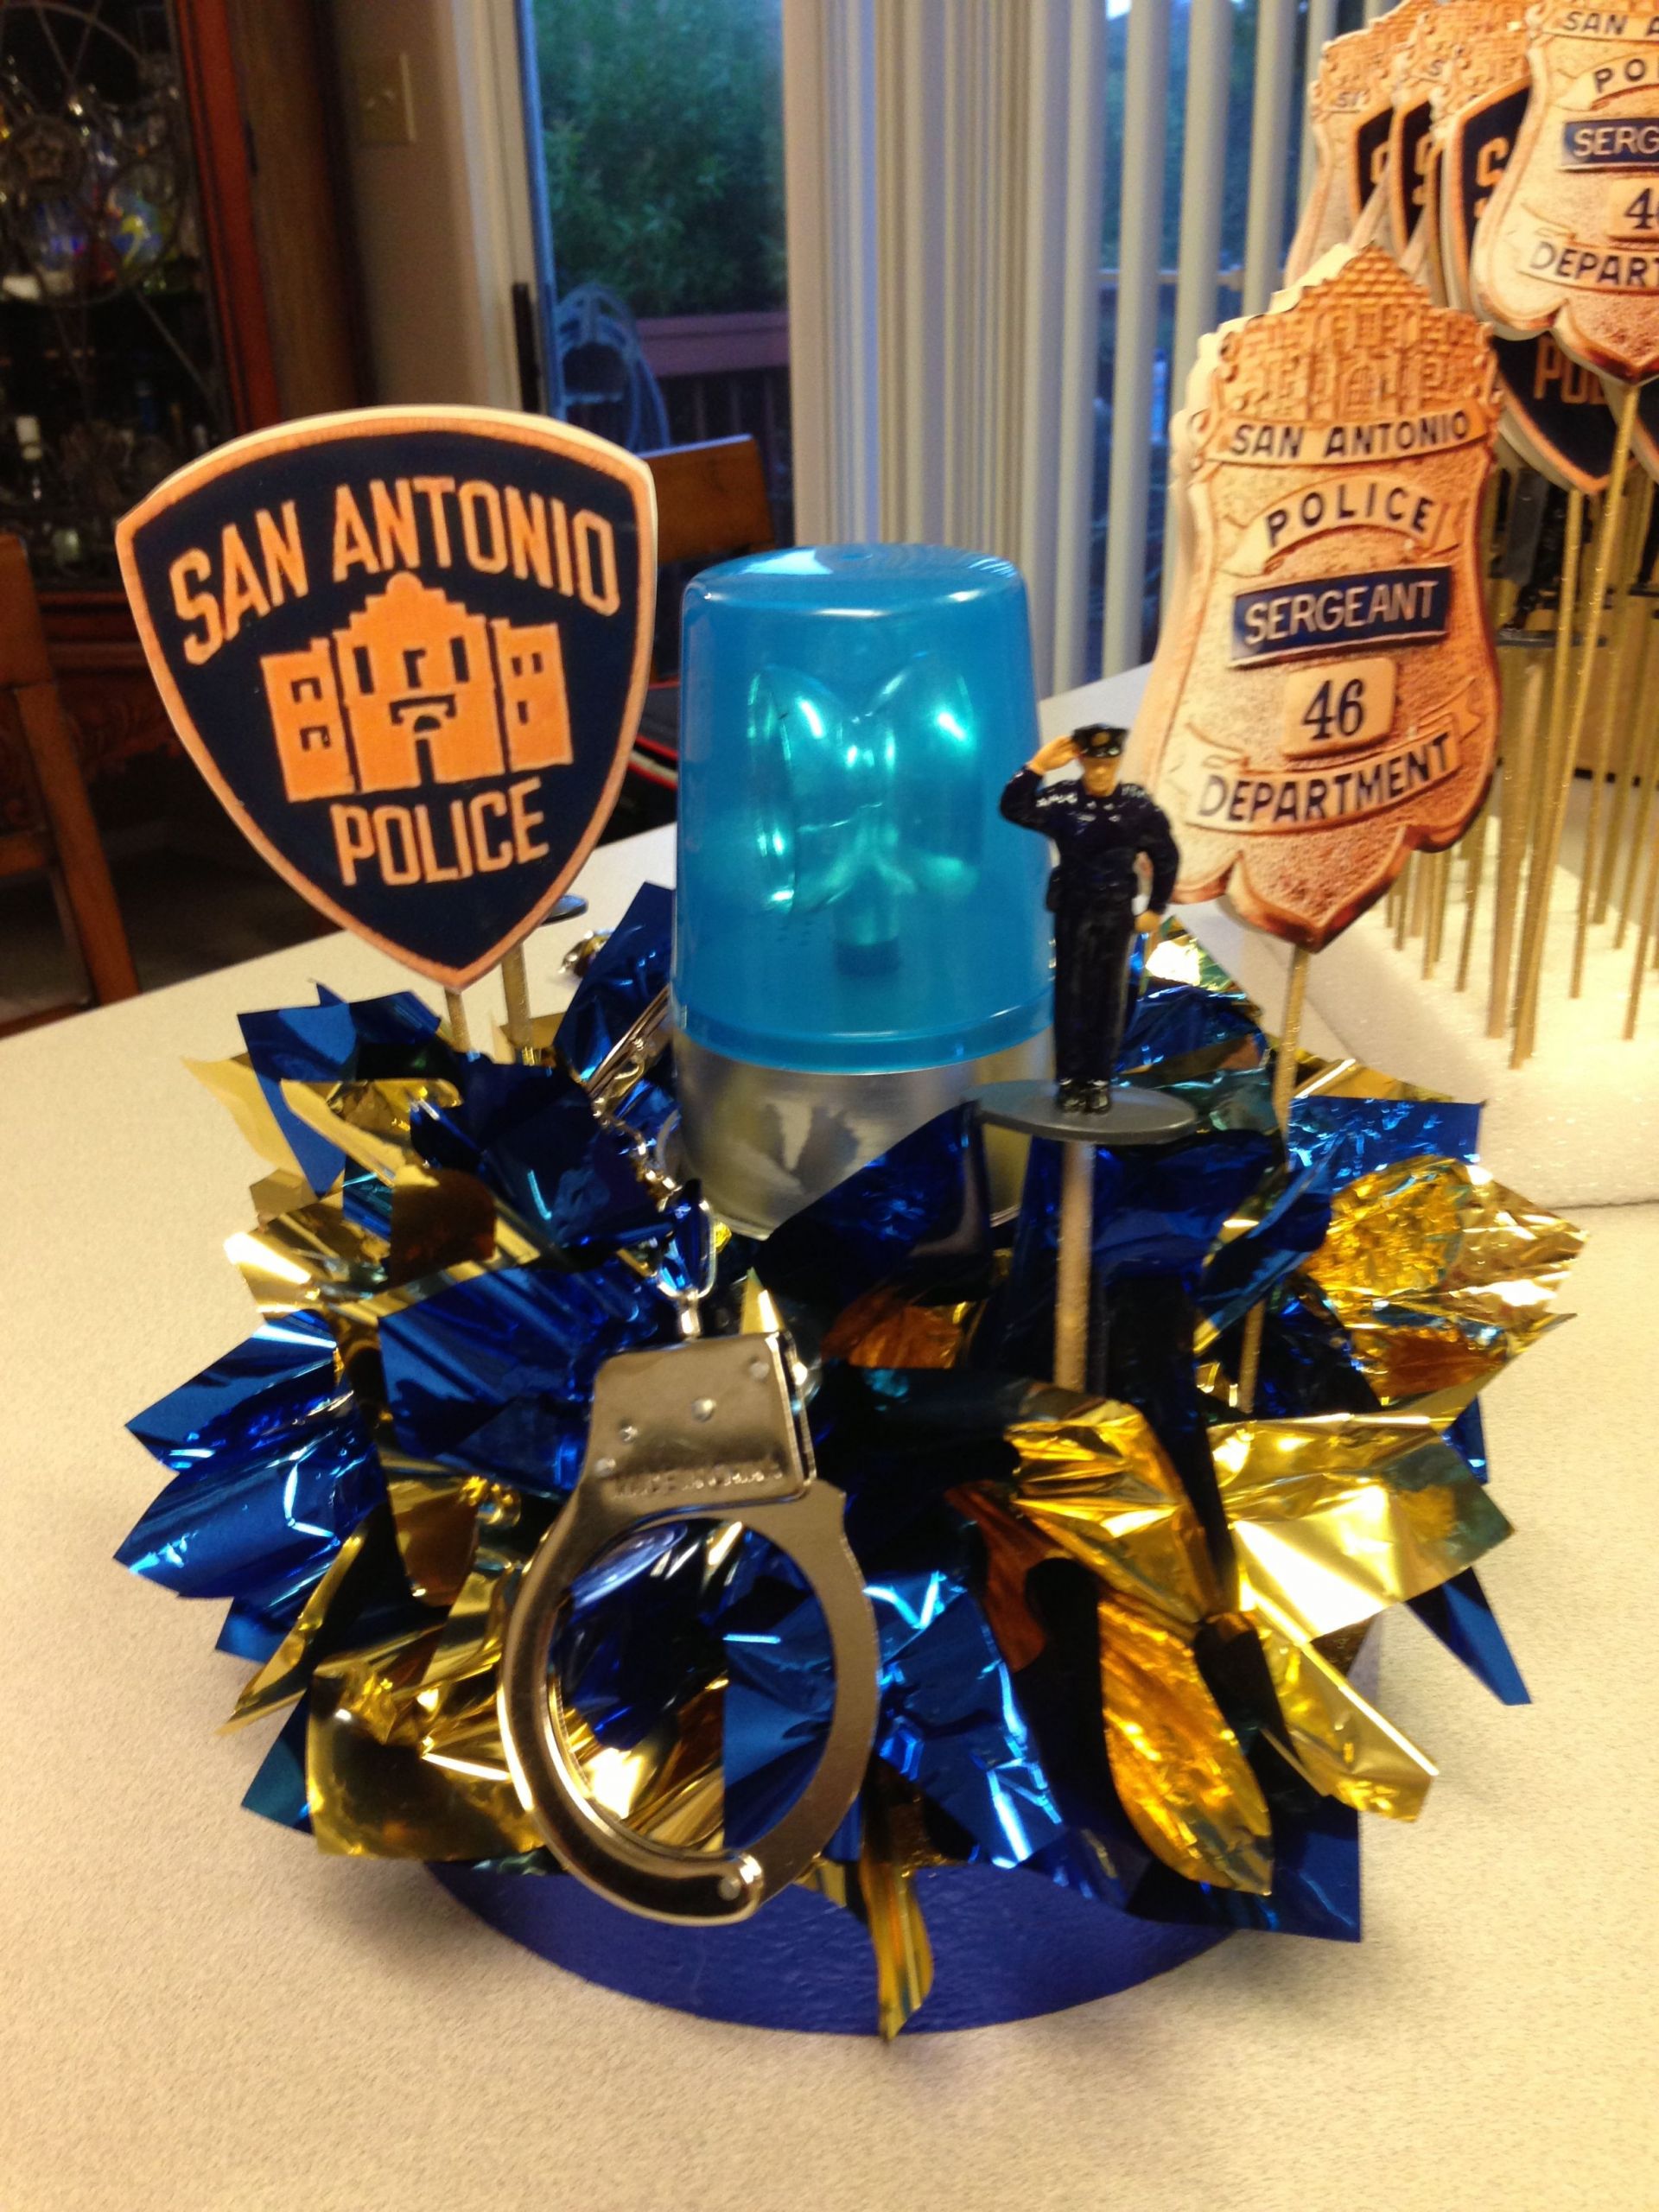 Centerpiece Ideas For Retirement Party
 Police Party DIY centerpiece for police officer retirement